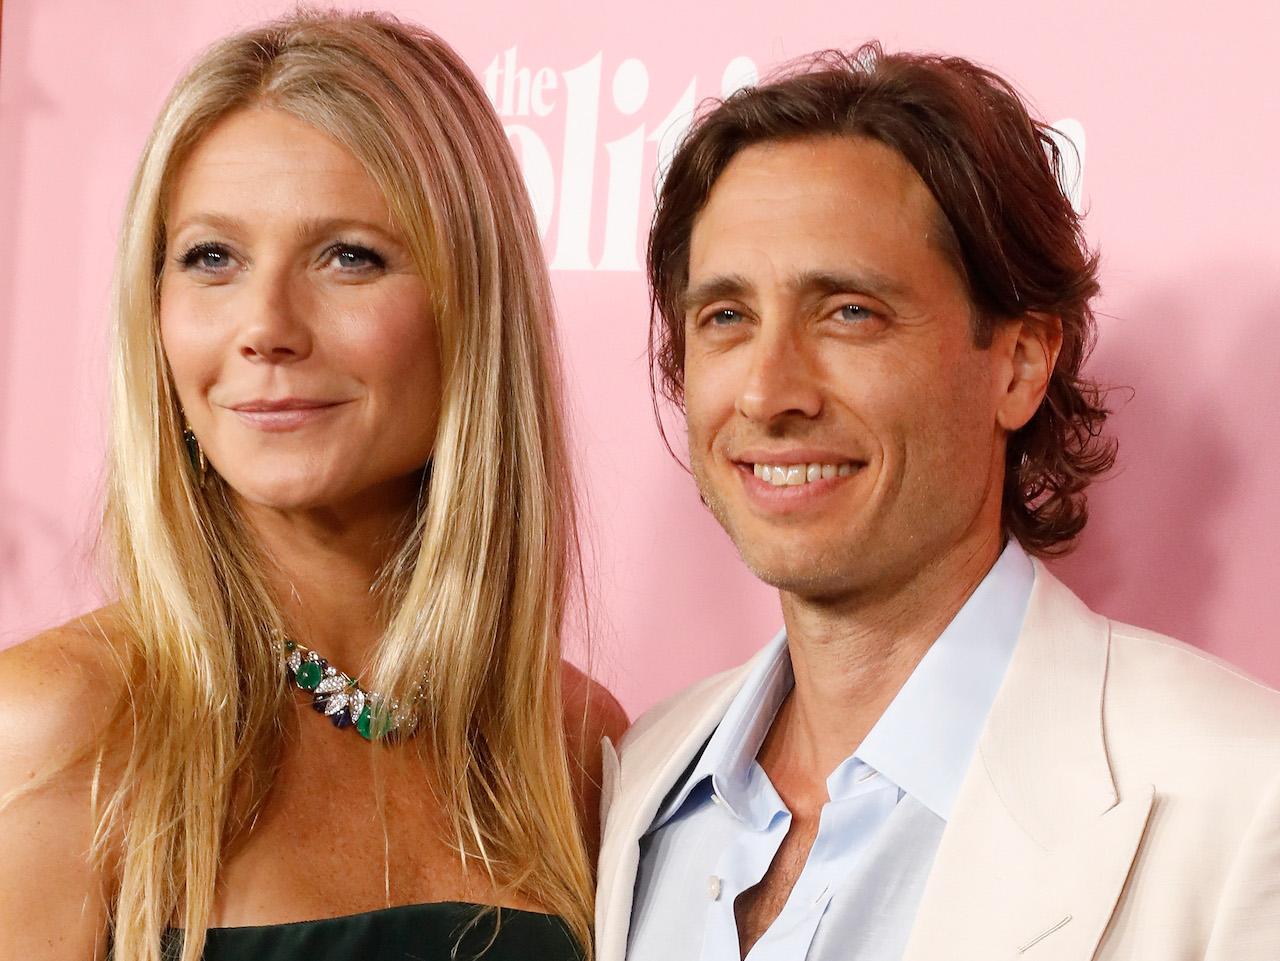 Gwyneth Paltrow and Brad Falchuk attend the premiere of Netflix's "The Politician" at DGA Theater on September 26, 2019 in New York City. (Photo by Taylor Hill/FilmMagic)